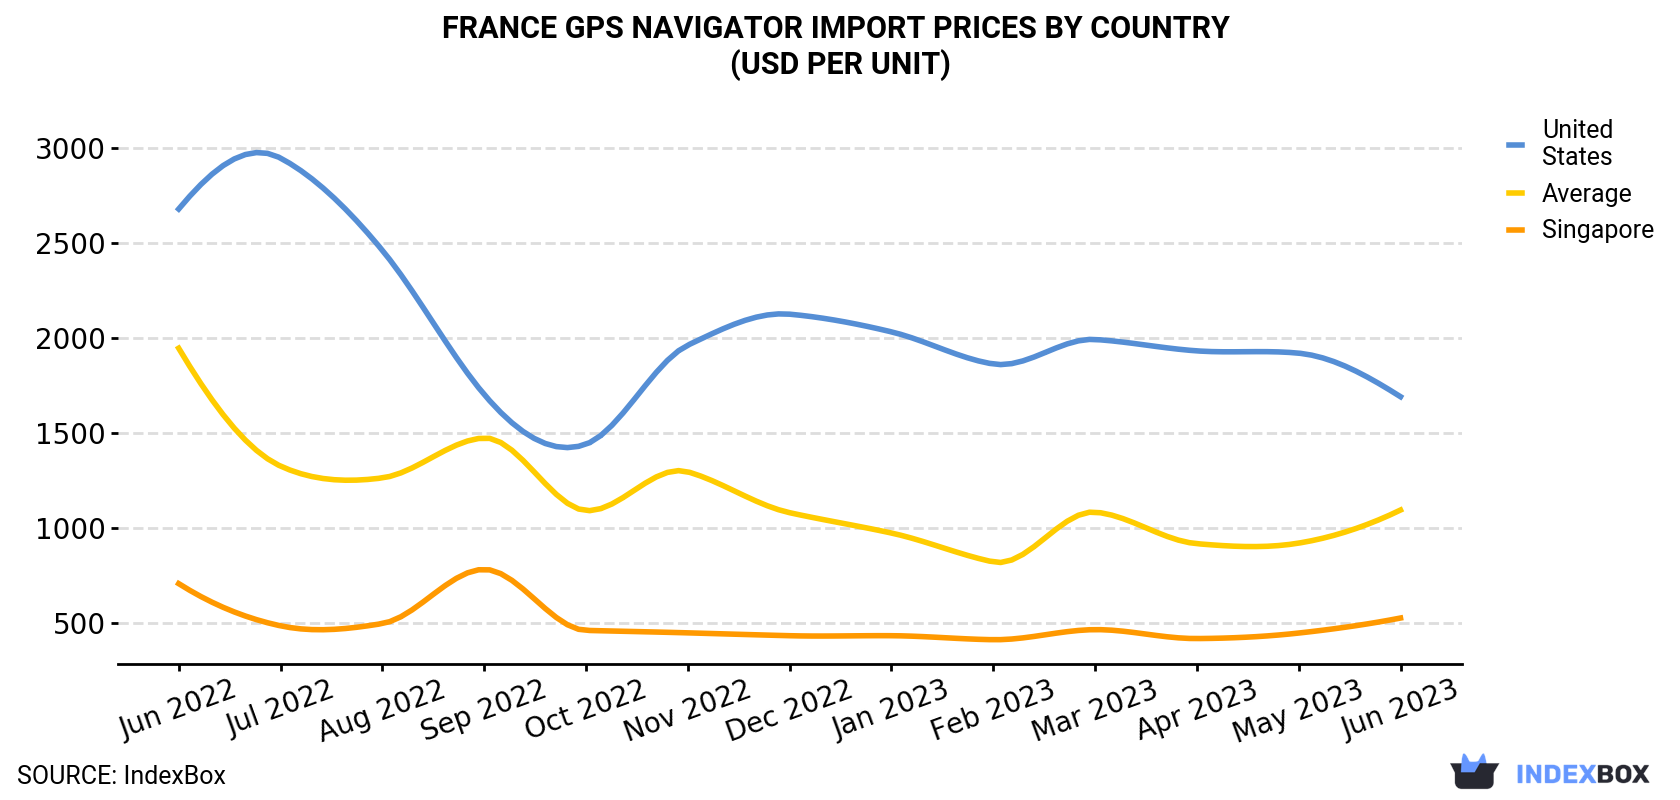 France GPS Navigator Import Prices By Country (USD Per Unit)